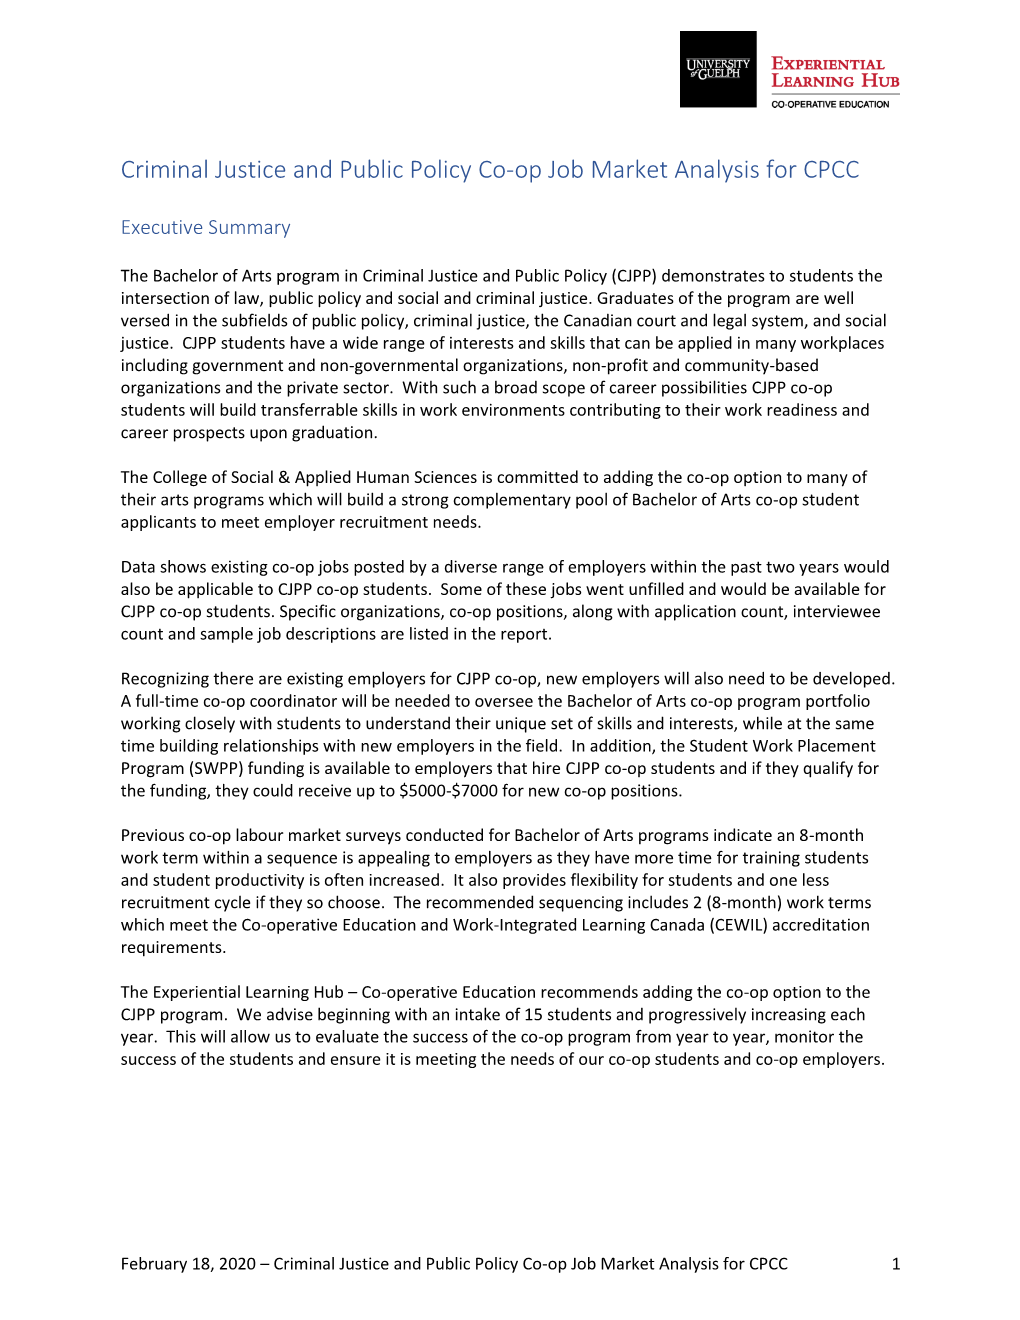 Criminal Justice and Public Policy Co-Op Job Market Analysis for CPCC